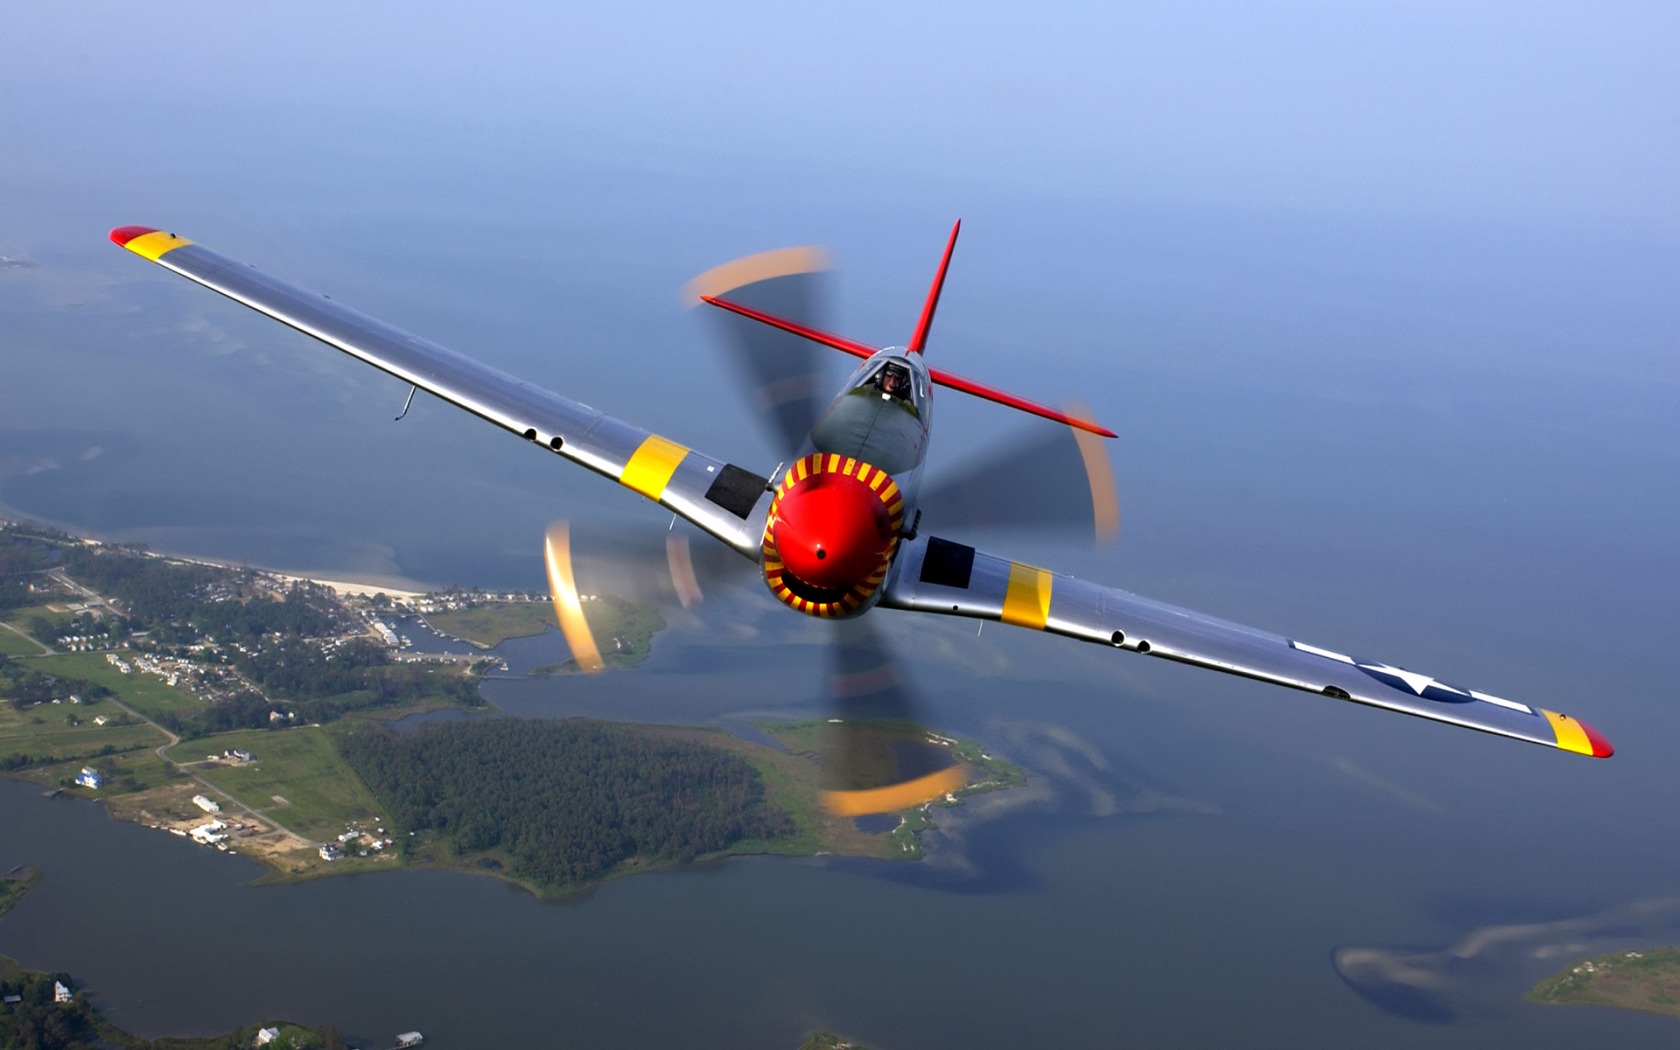 Military Airplanes 9287 Hd Wallpapers in Aircraft   Imagescicom